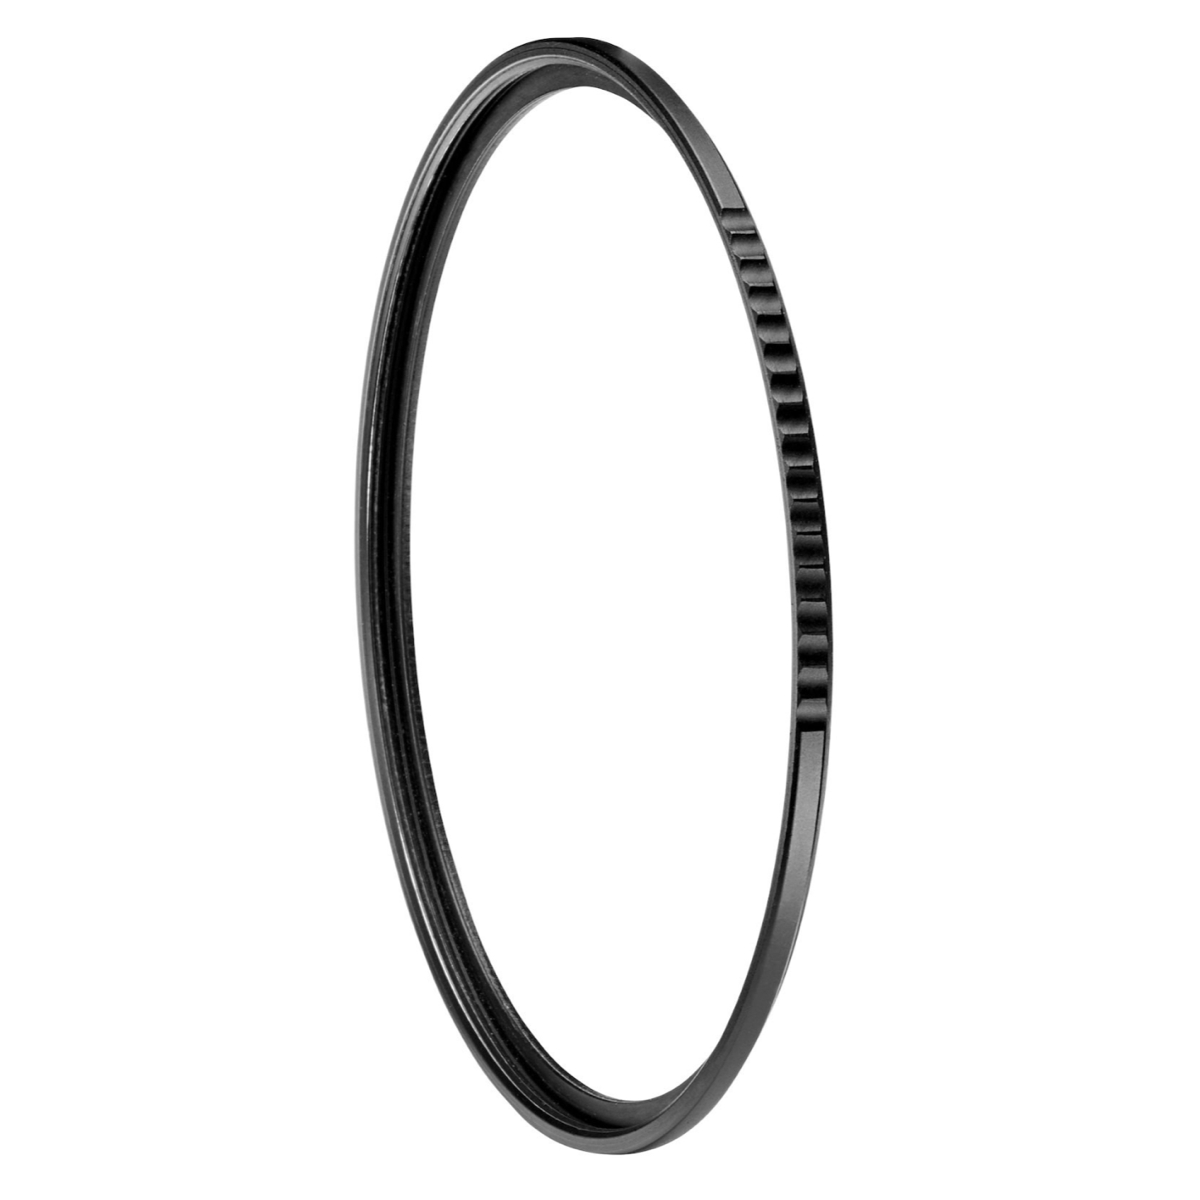 Manfrotto XUME 49mm Filter Adapter